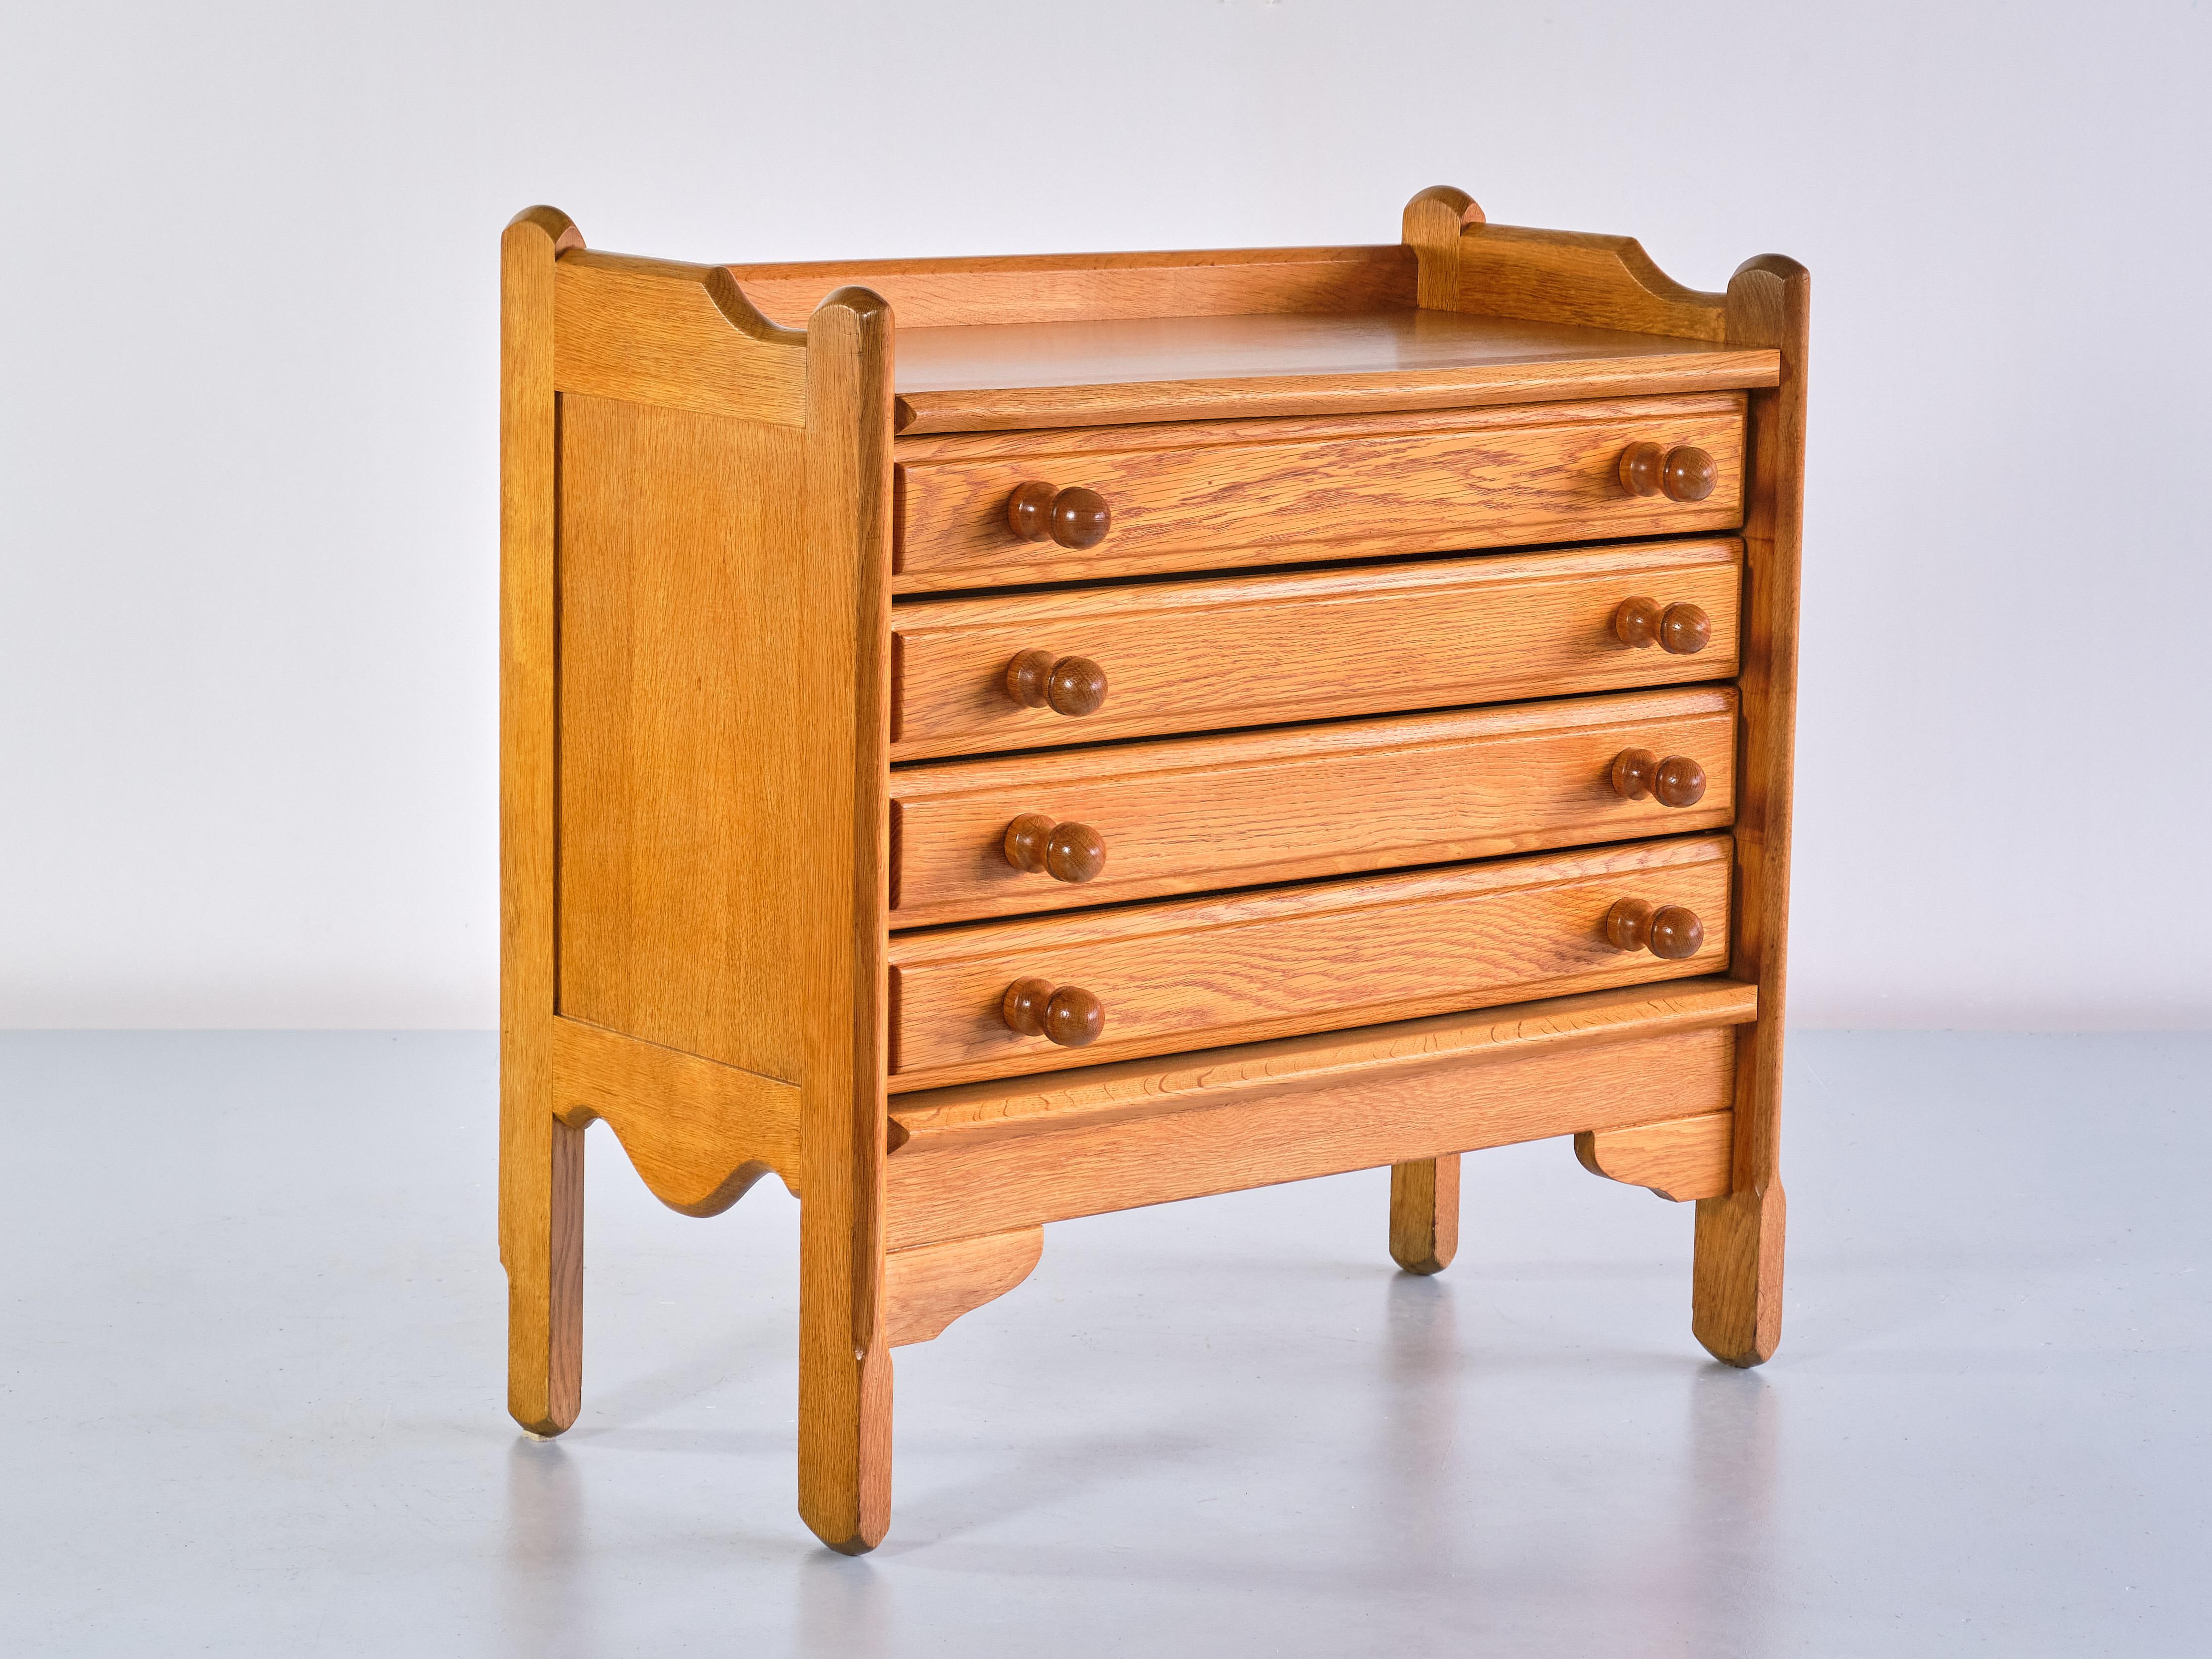 This striking chest of drawers was designed by Jacques Chambron and Robert Guillerme in the 1960s. It was produced by their company Votre Maison in Northern France.

The chest of drawers is made of a light solid oak wood with a very attractive